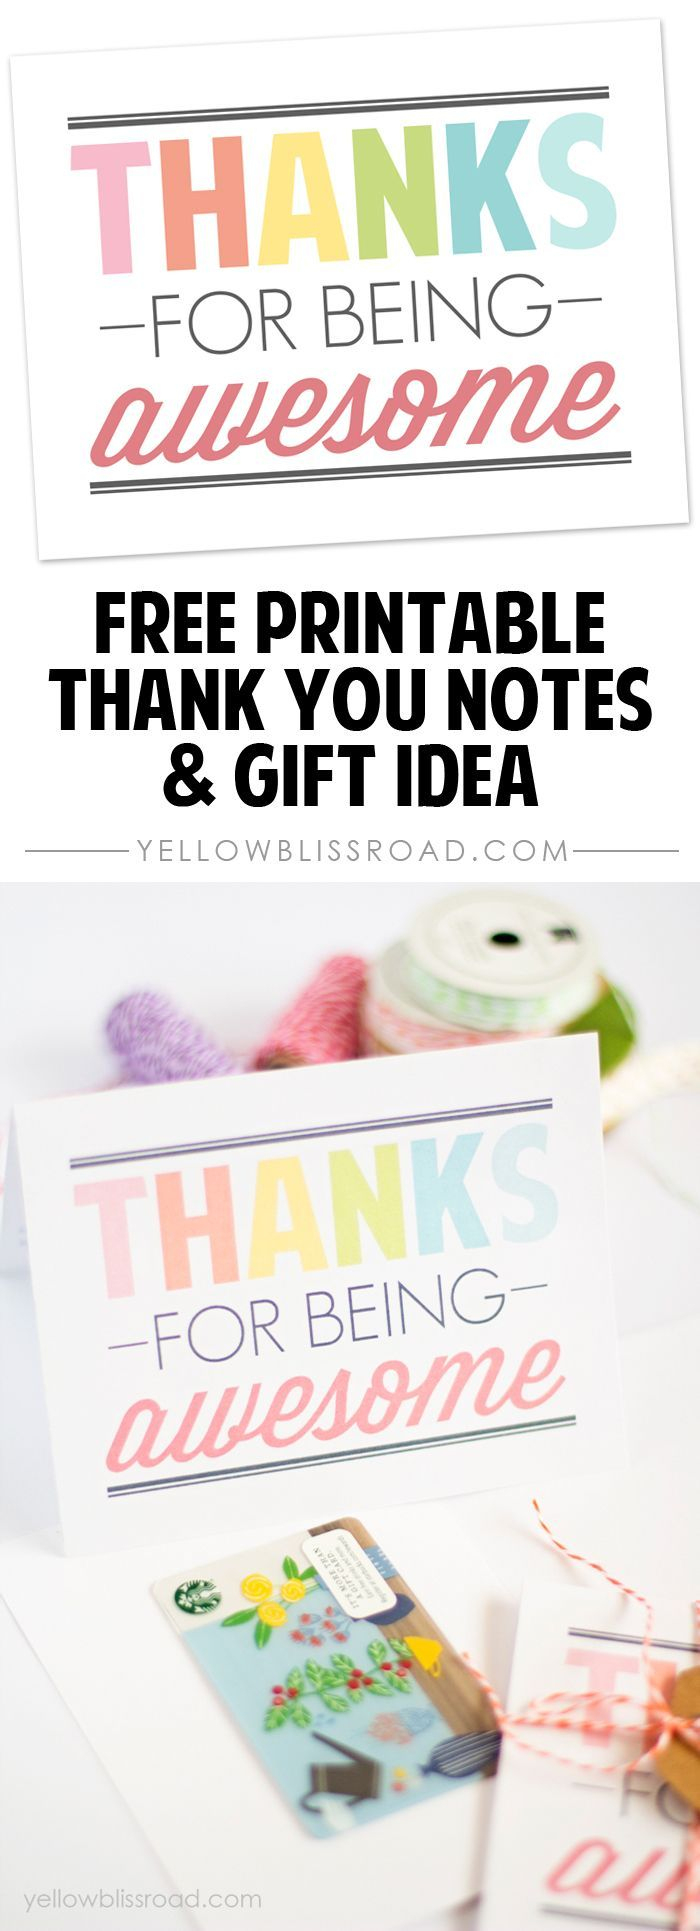 Free Printable Thank You Notes | Best Of Pinterest | Pinterest - Free Printable Volunteer Thank You Cards